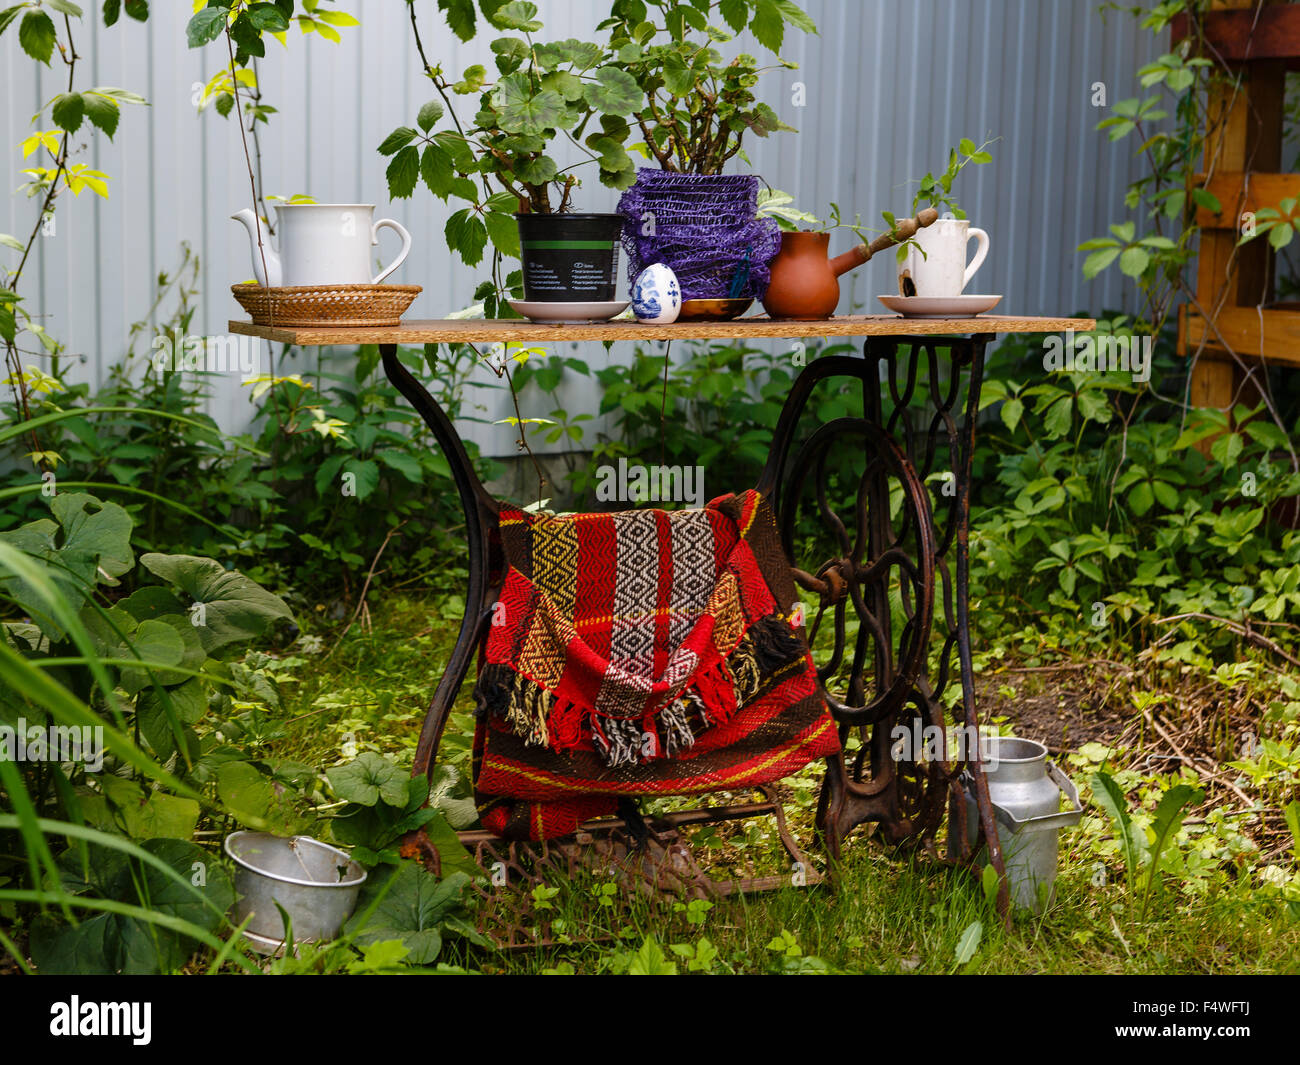 Old sewing machine as element of garden decoration Stock Photo